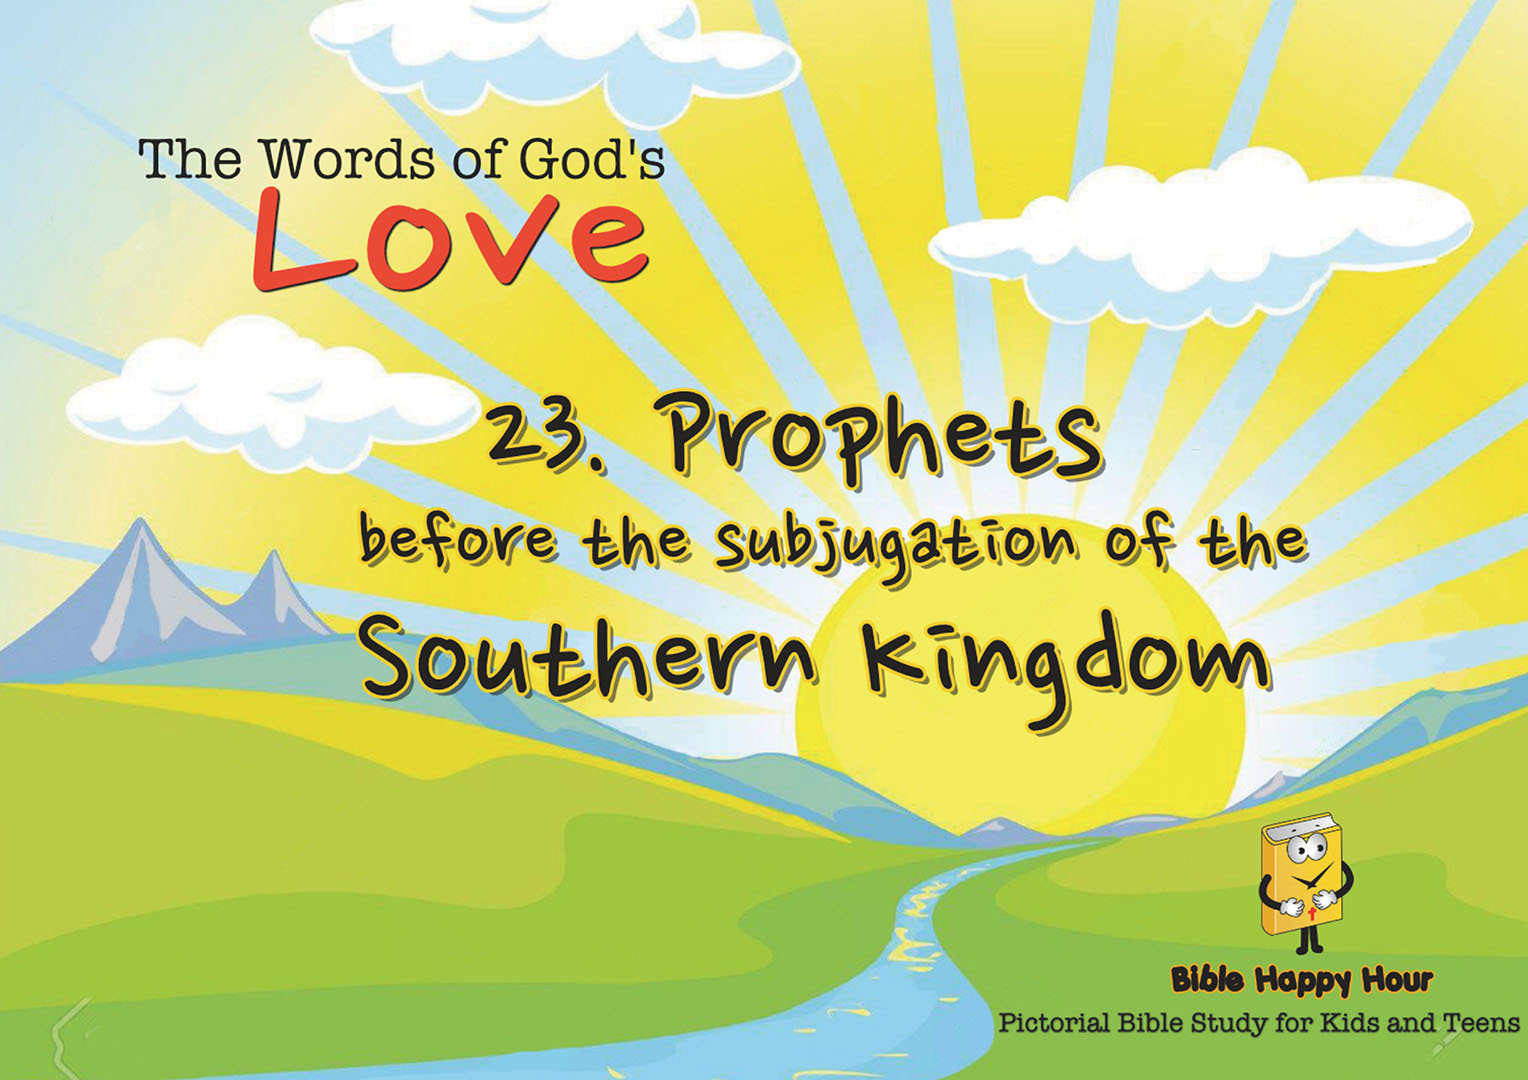 Chapter 23 - Lesson 70 - Prophets Before the Subjugation of Southern Kingdom: Joel